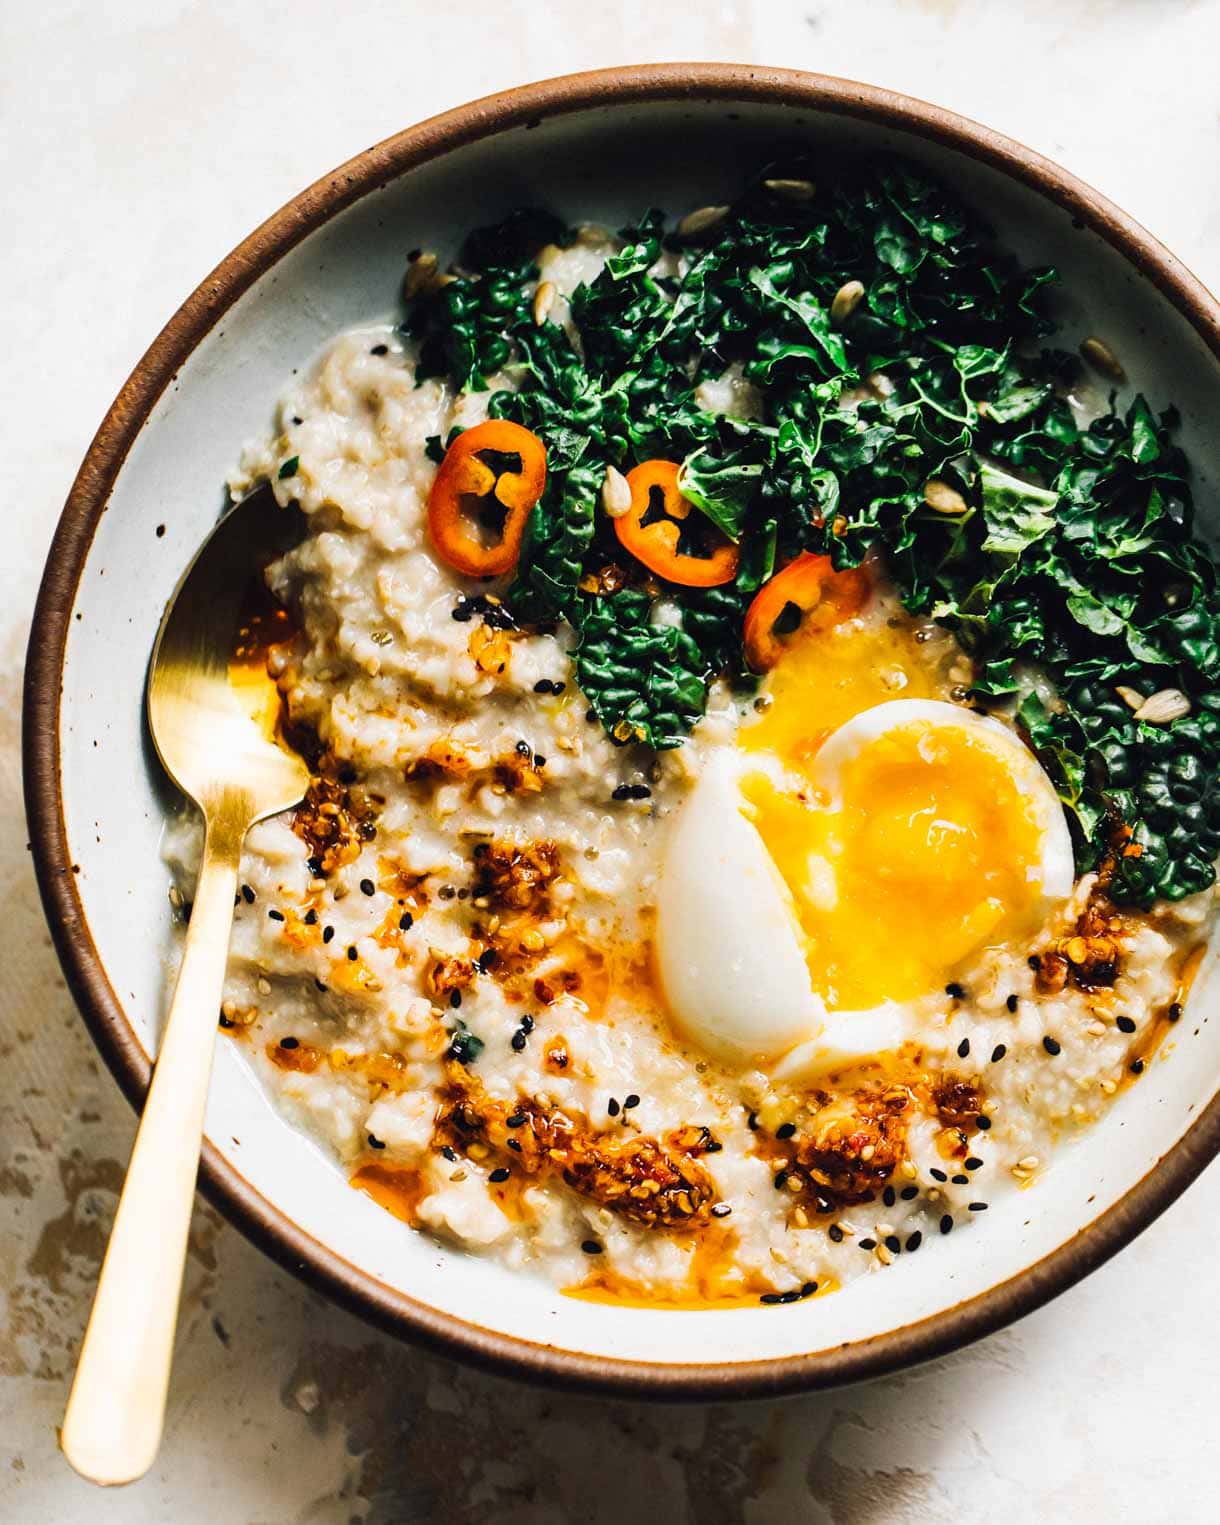 savory oatmeal with an egg, greens, chili oil